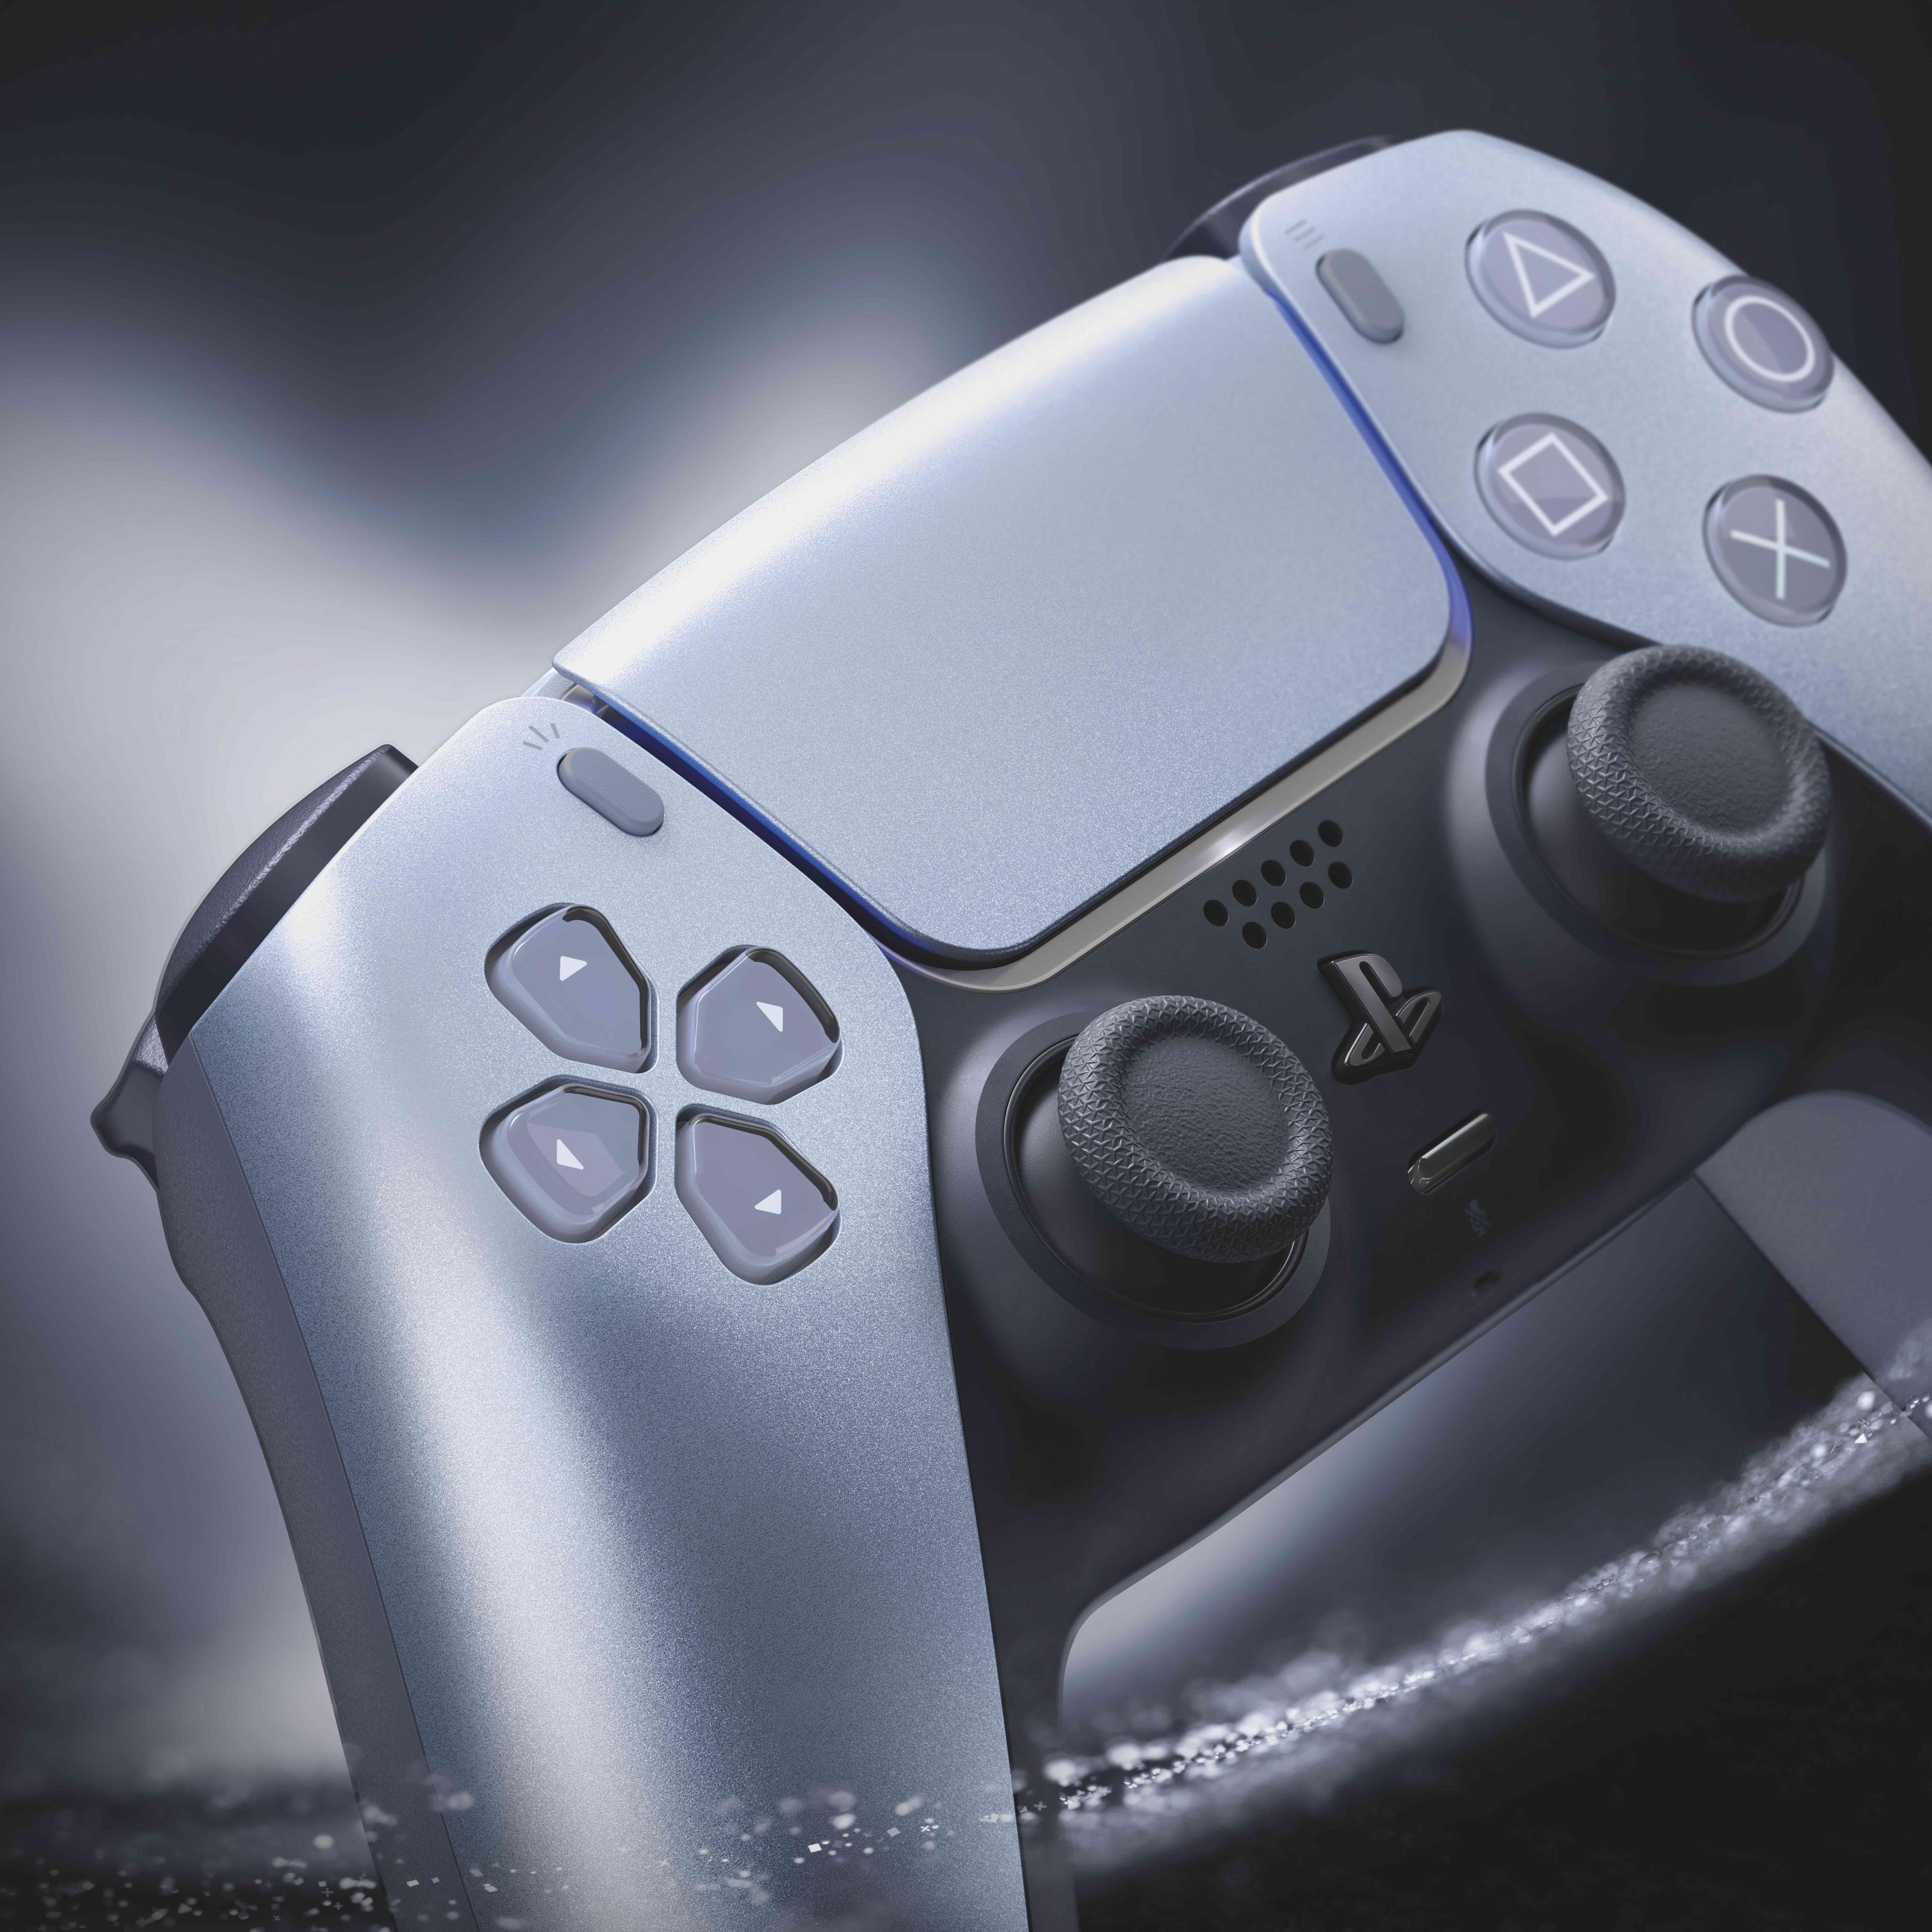 DualSense Wireless Controller for PlayStation 5 (Sterling Silver